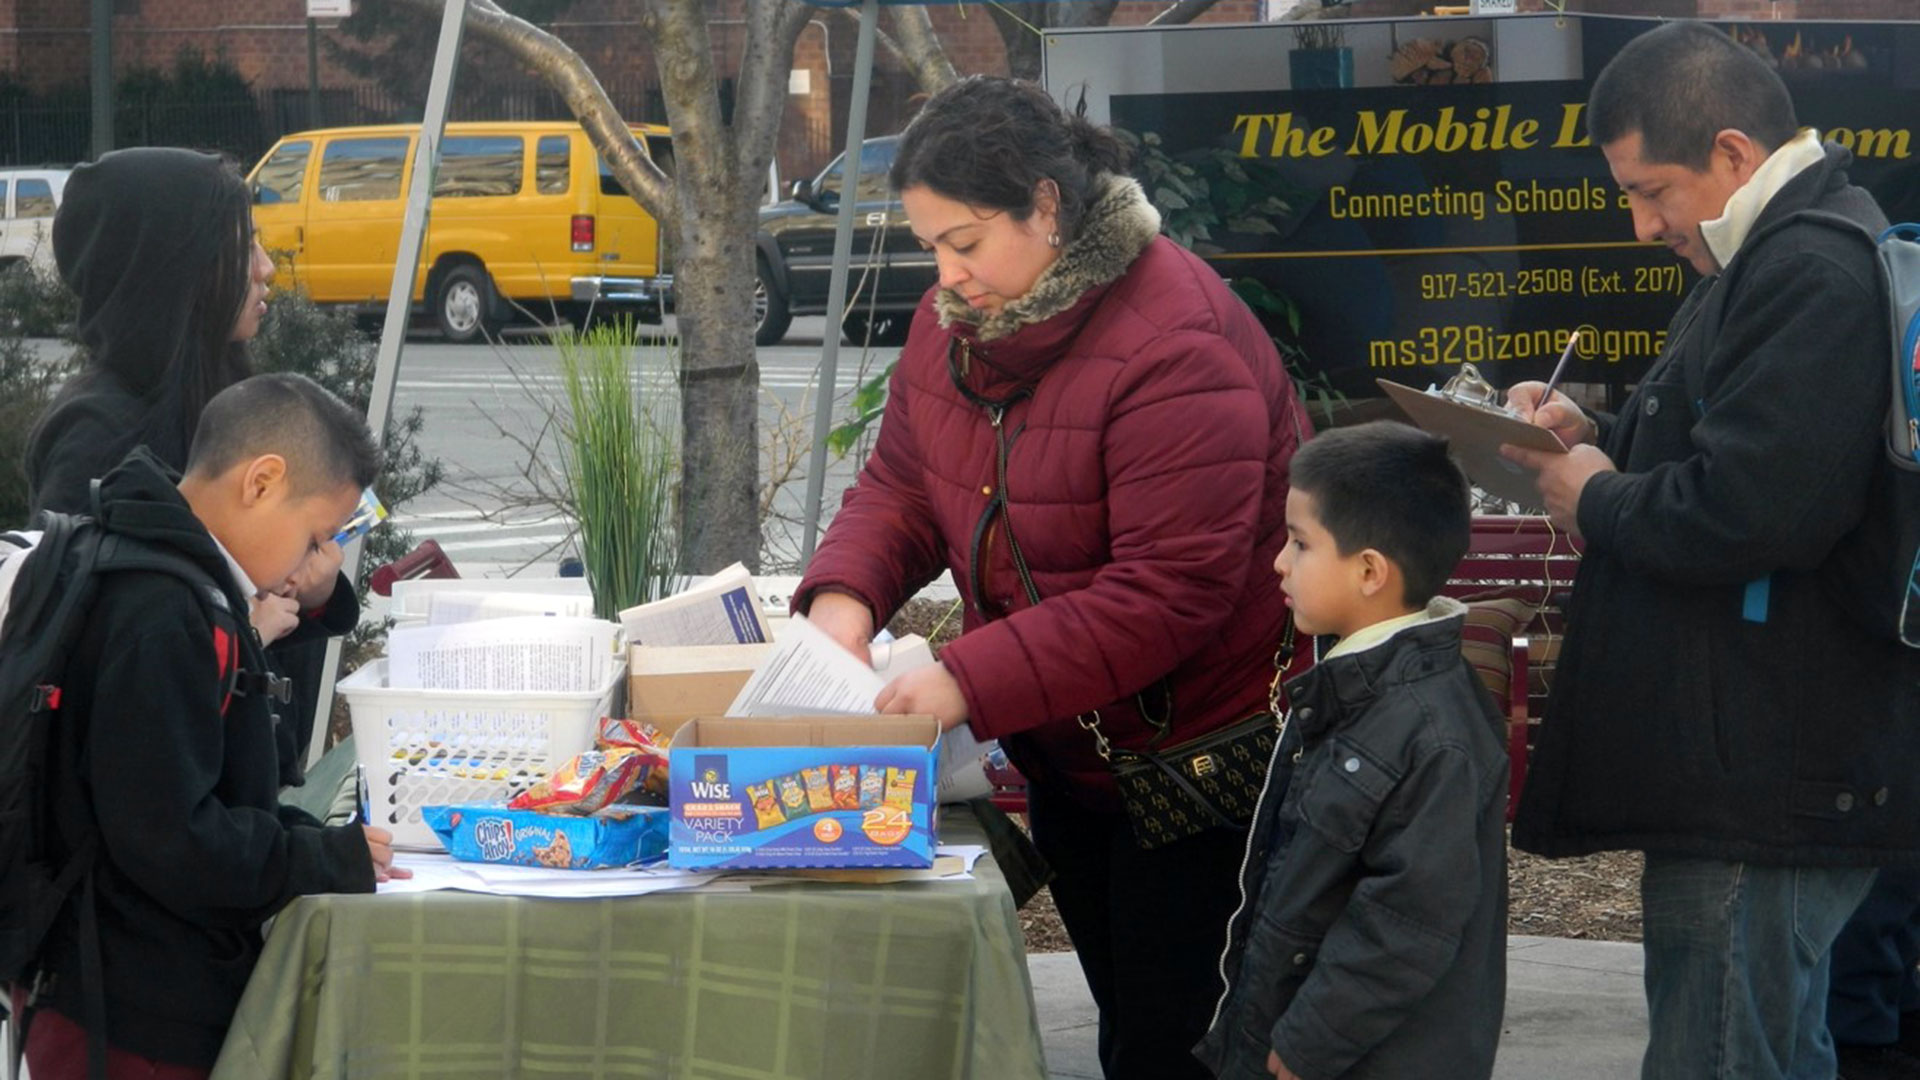 MS 328 staff in Washington Heights tried to engage with parents in a new way by setting up "mobile living rooms" after learning that many parents were hesitant to enter school buildings after negative experiences there.